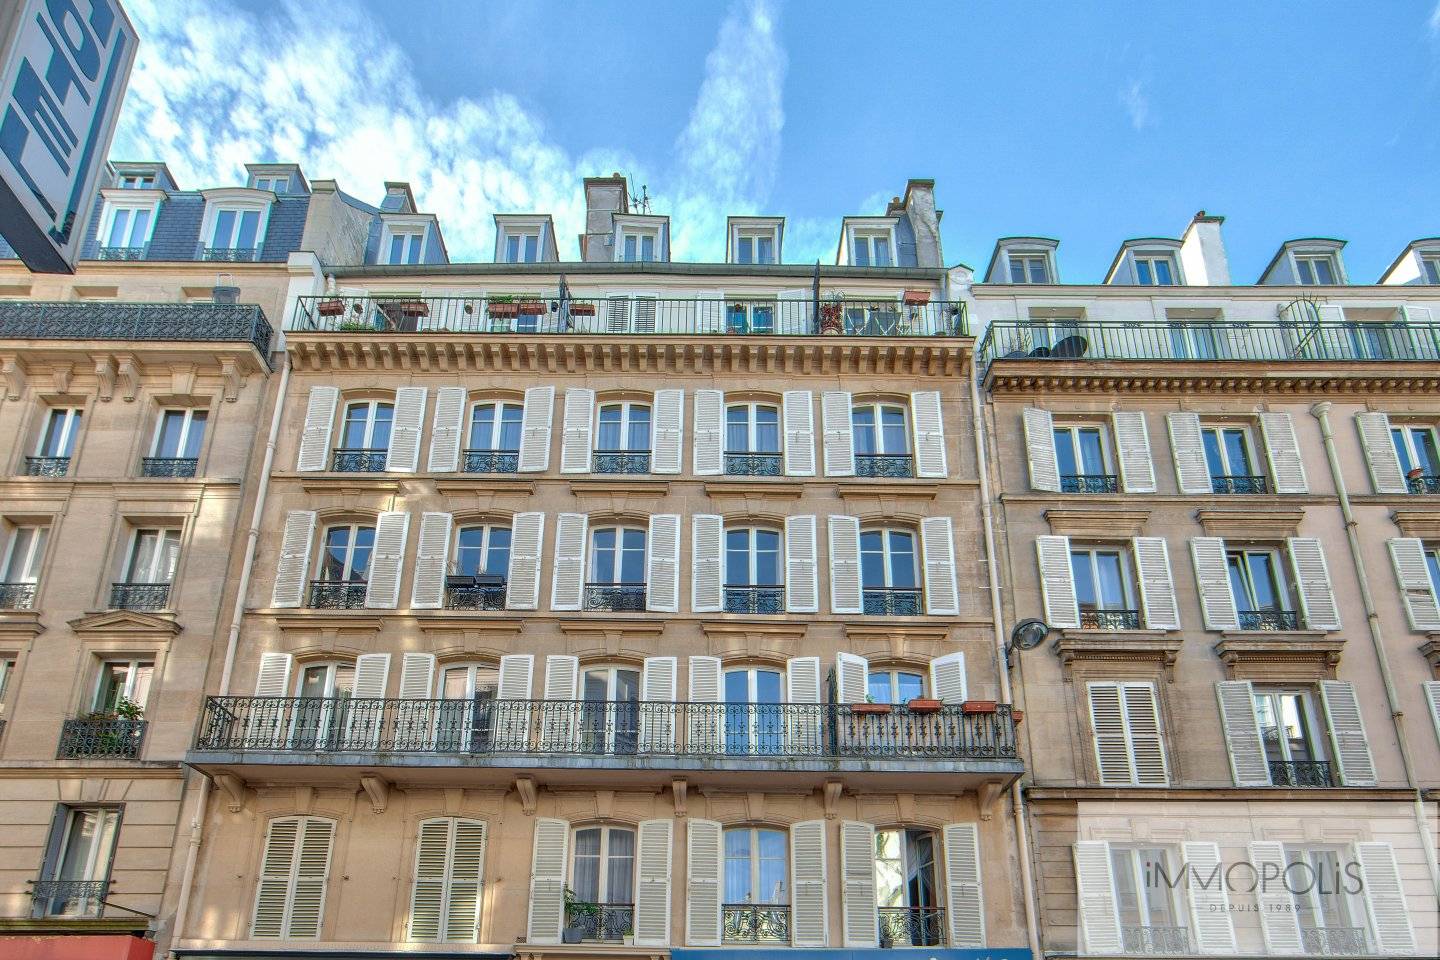 Apartment to be renovated in the heart of the abbesses. 1